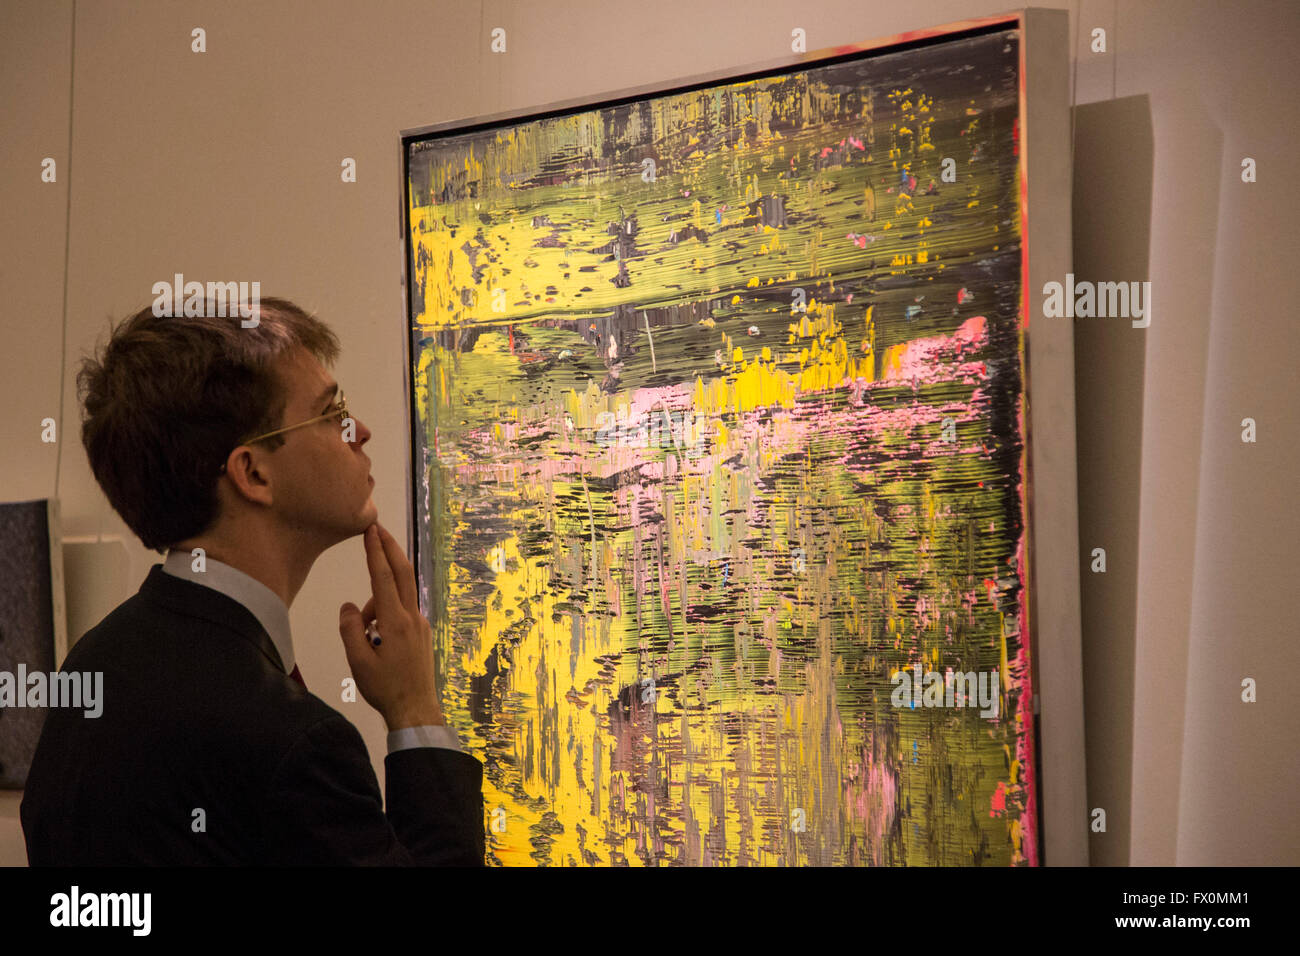 London, UK. 8 April 2016. A Sotheby's employee looks at the painting Abstraktes Bild, 1988, by Gerhard Richter. Estimate USC 3.5-4.5 million. Sotheby's London Auction Preview of art from the Contemporary Art Evening Auction in New York on 11 May 2016. Stock Photo